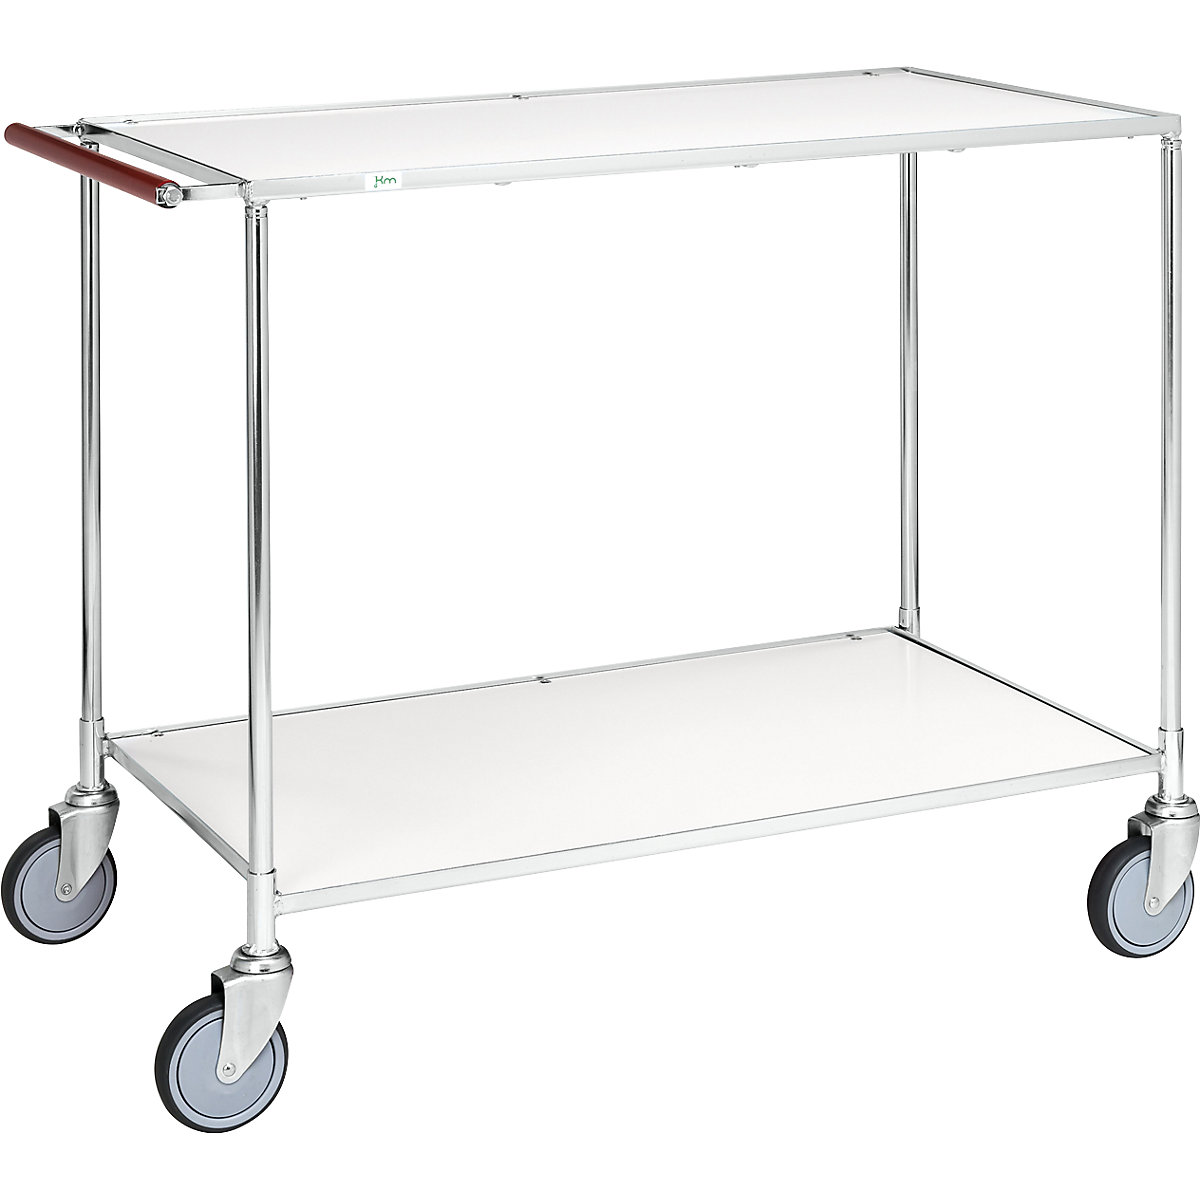 Table trolley – Kongamek, 2 shelves, LxWxH 1080 x 580 x 870 mm, zinc plated / white, 2+ items-7